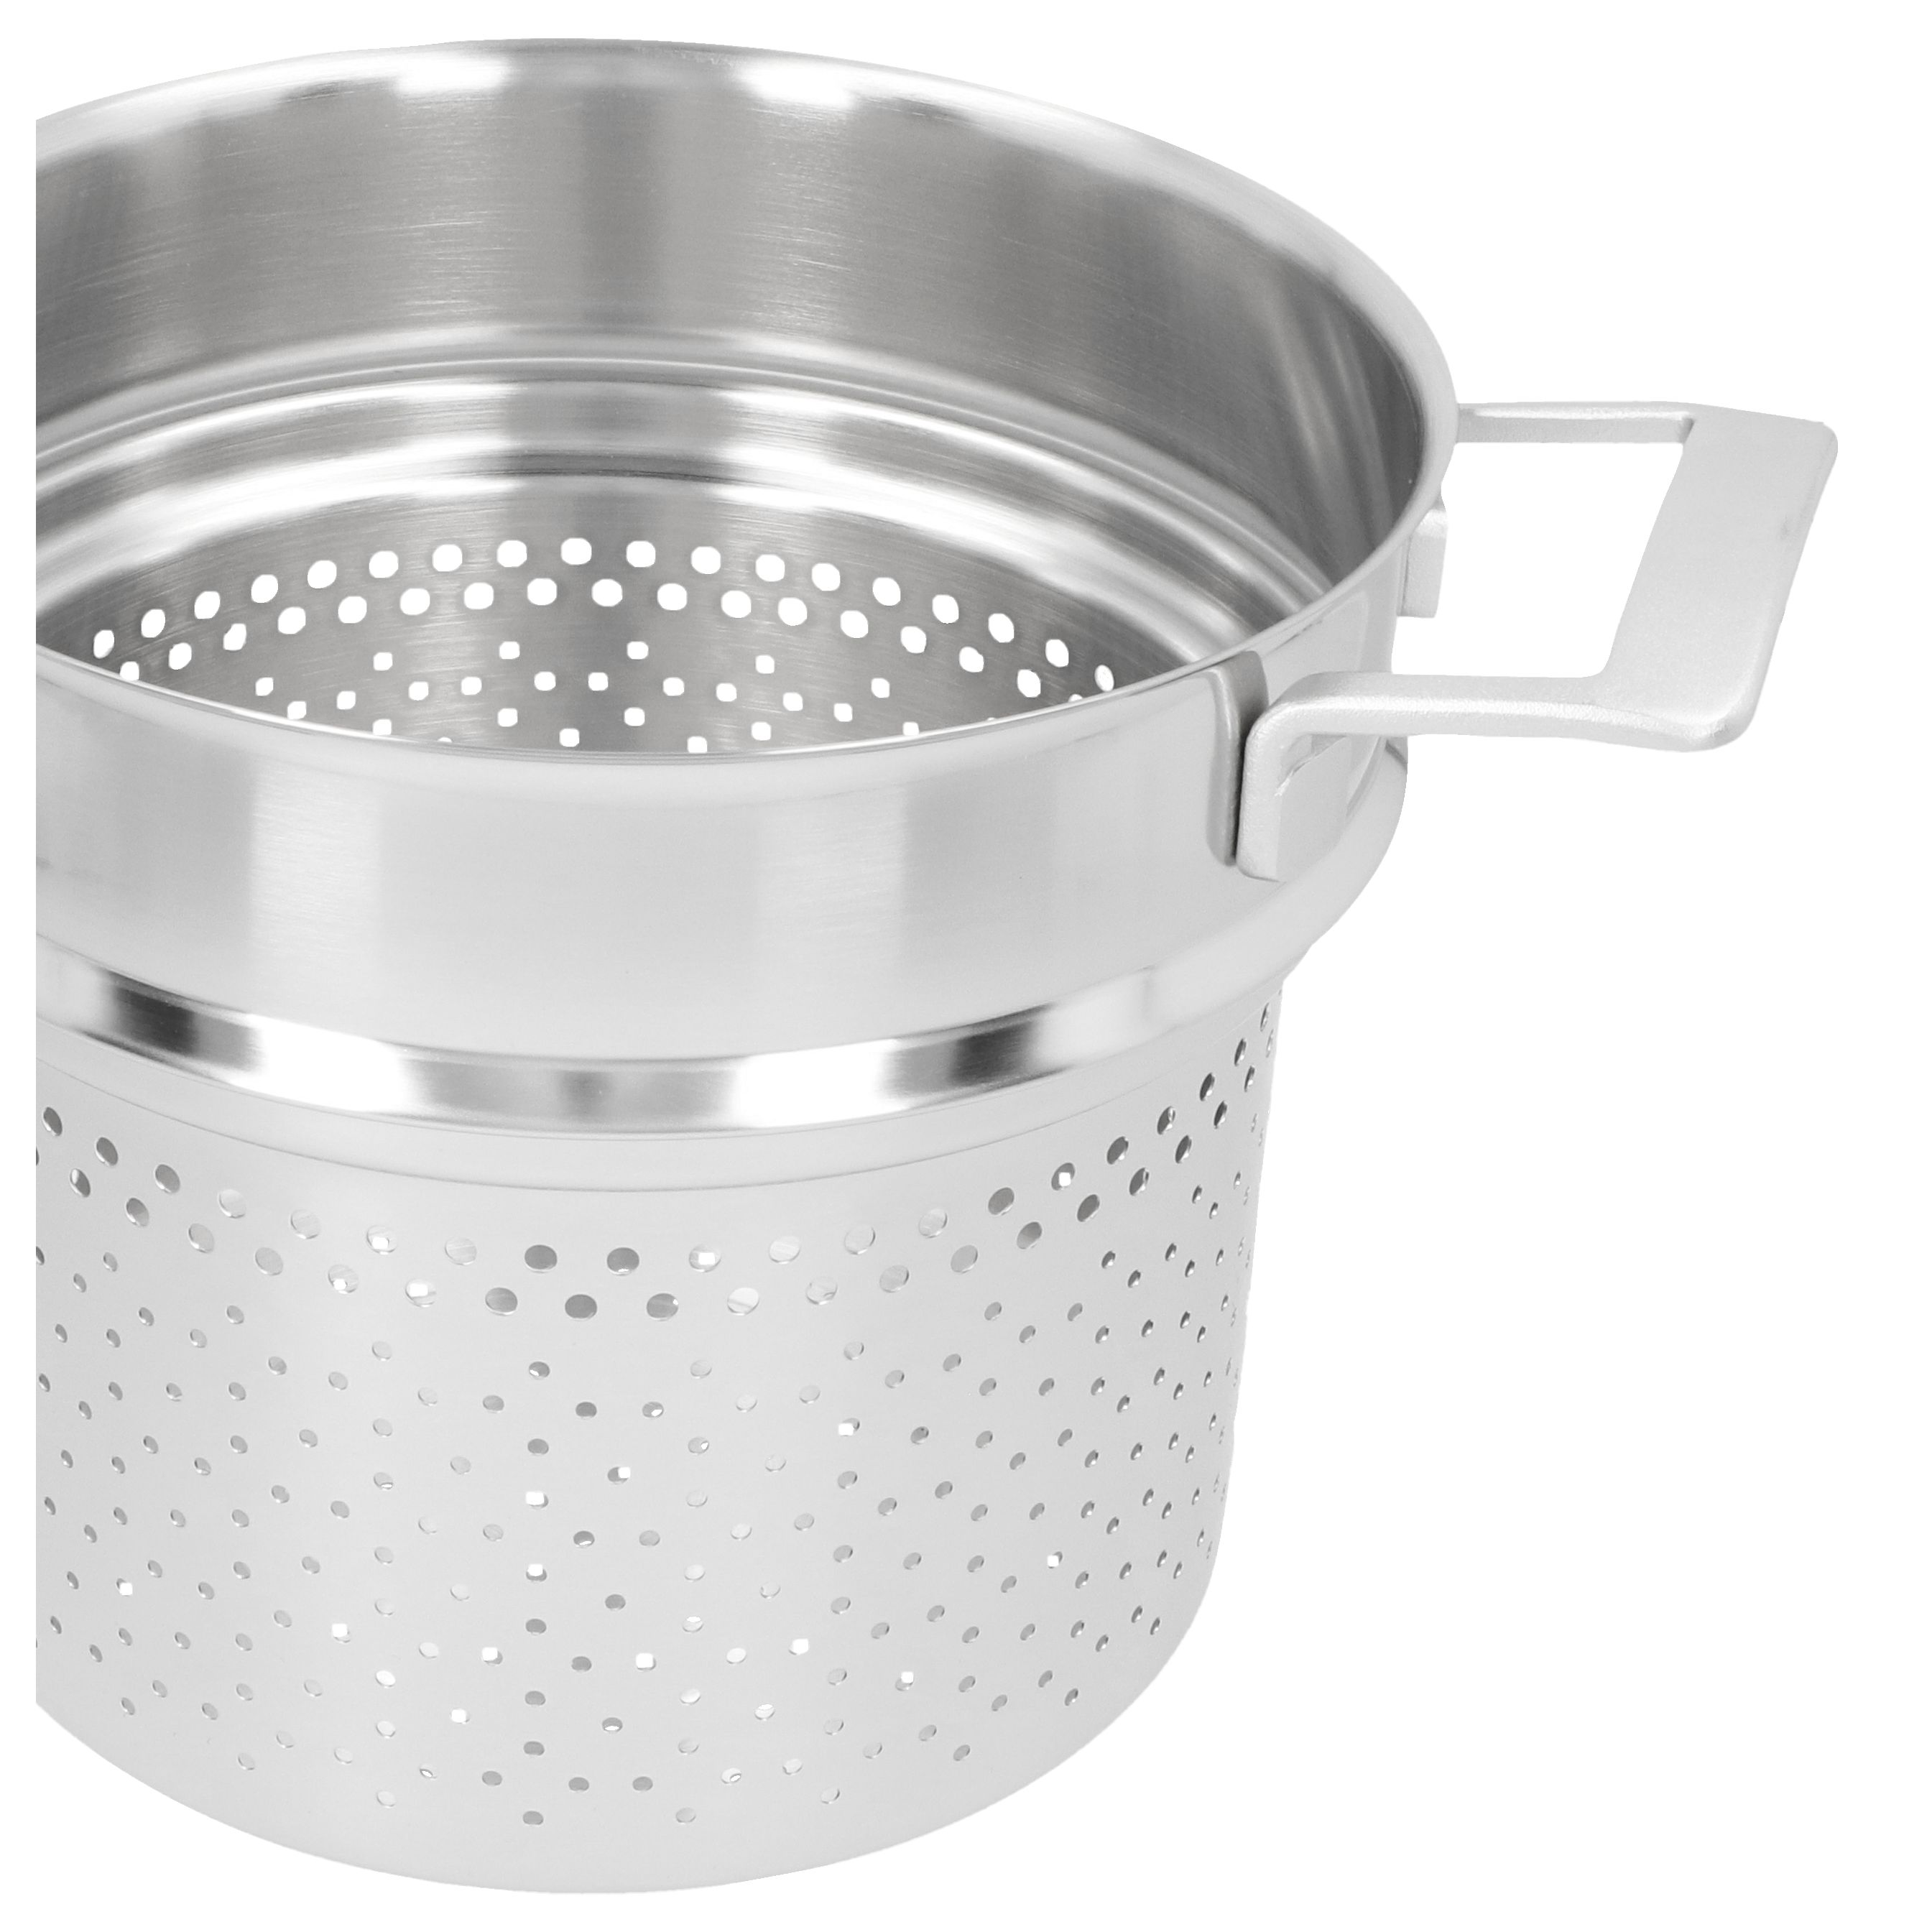 Signature Stainless Steel Stockpot with Colander Insert